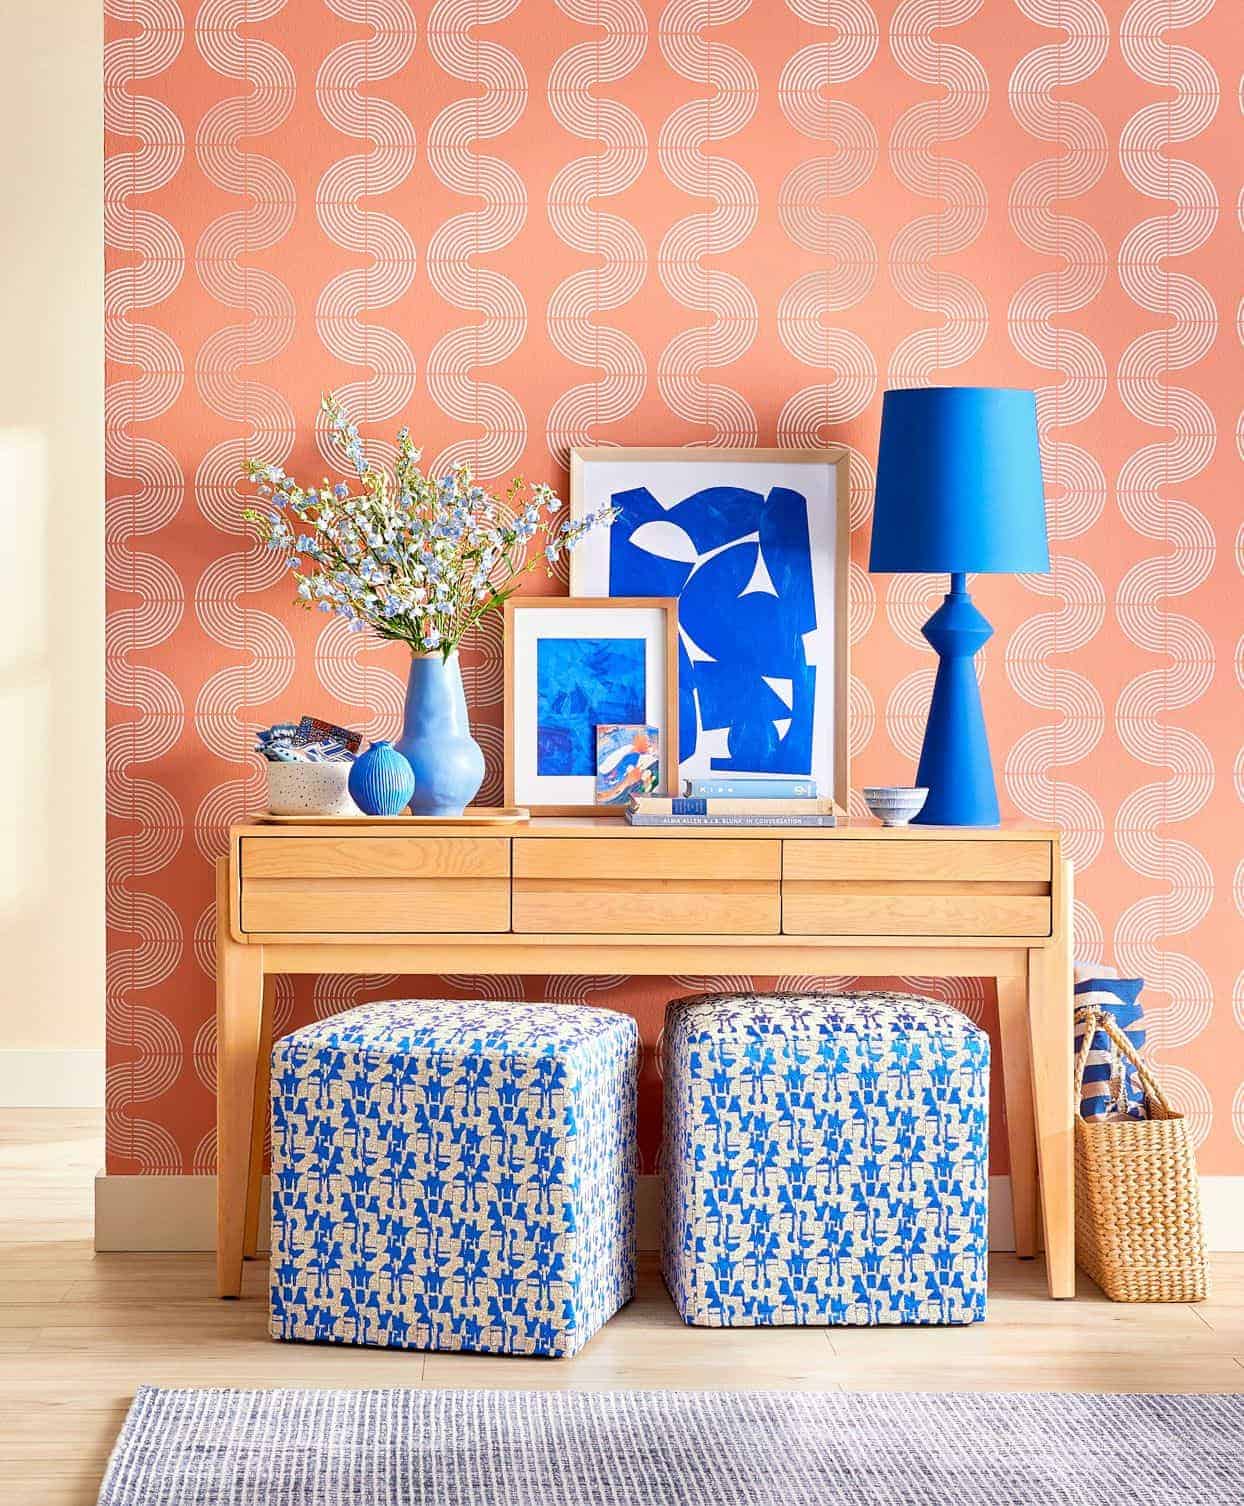 Peach coloured wall paint design with table and seating